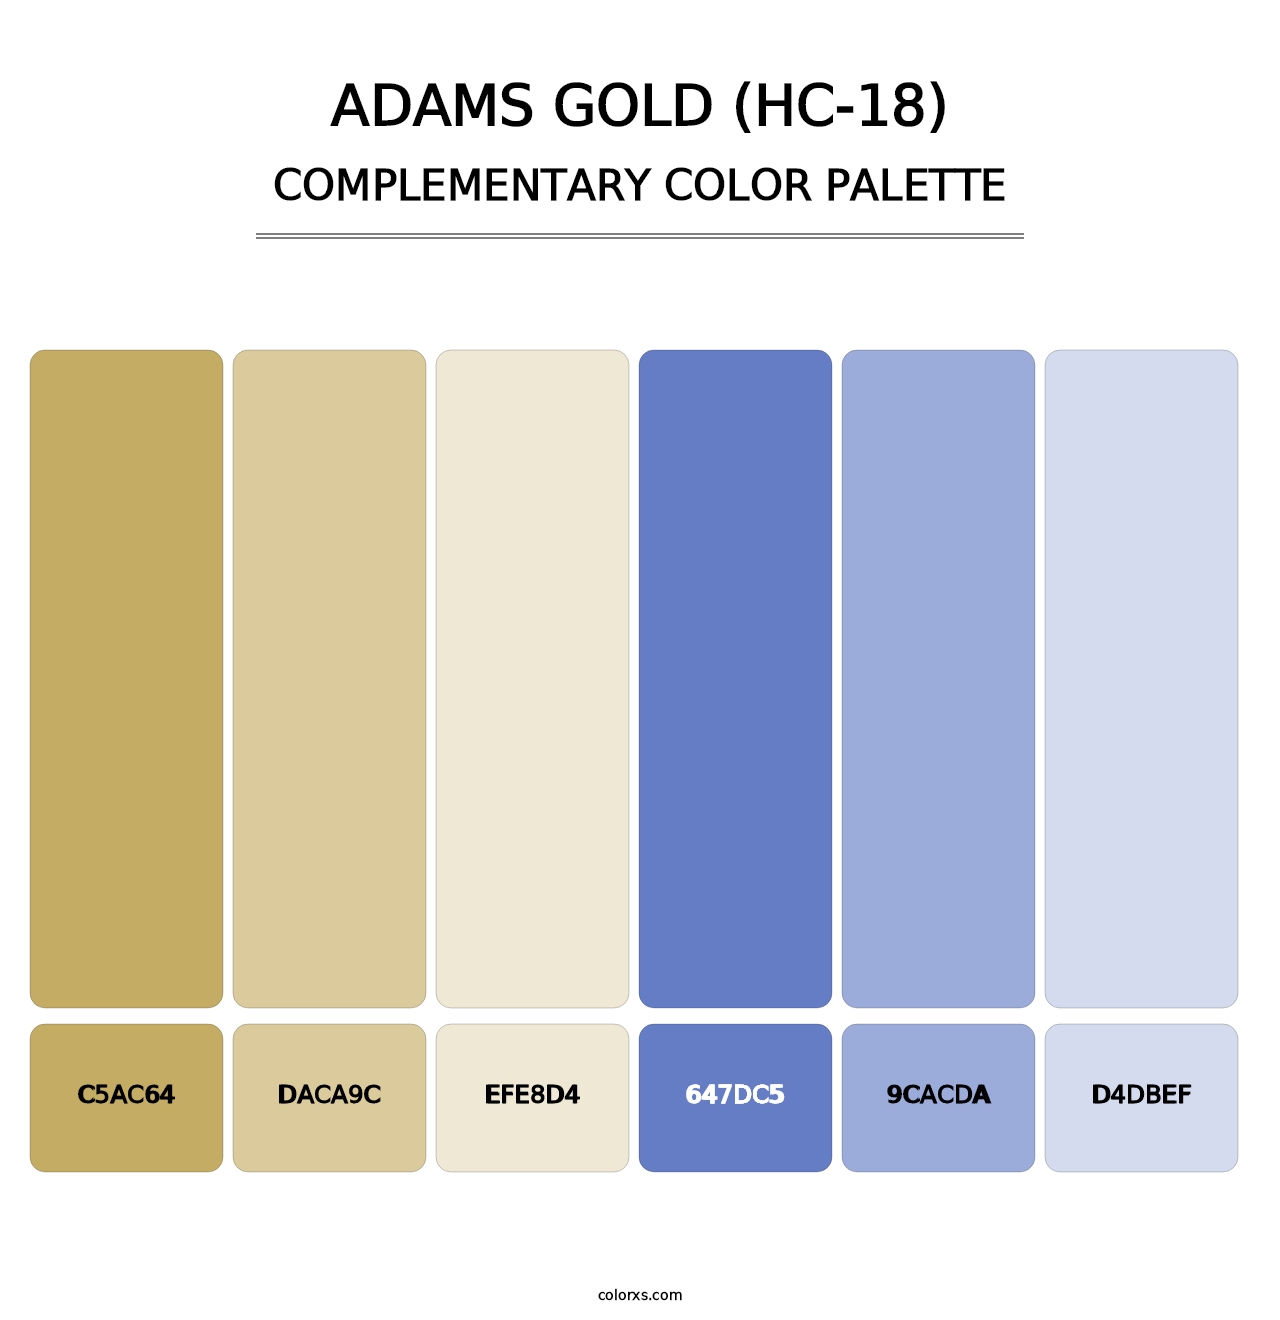 Adams Gold (HC-18) - Complementary Color Palette